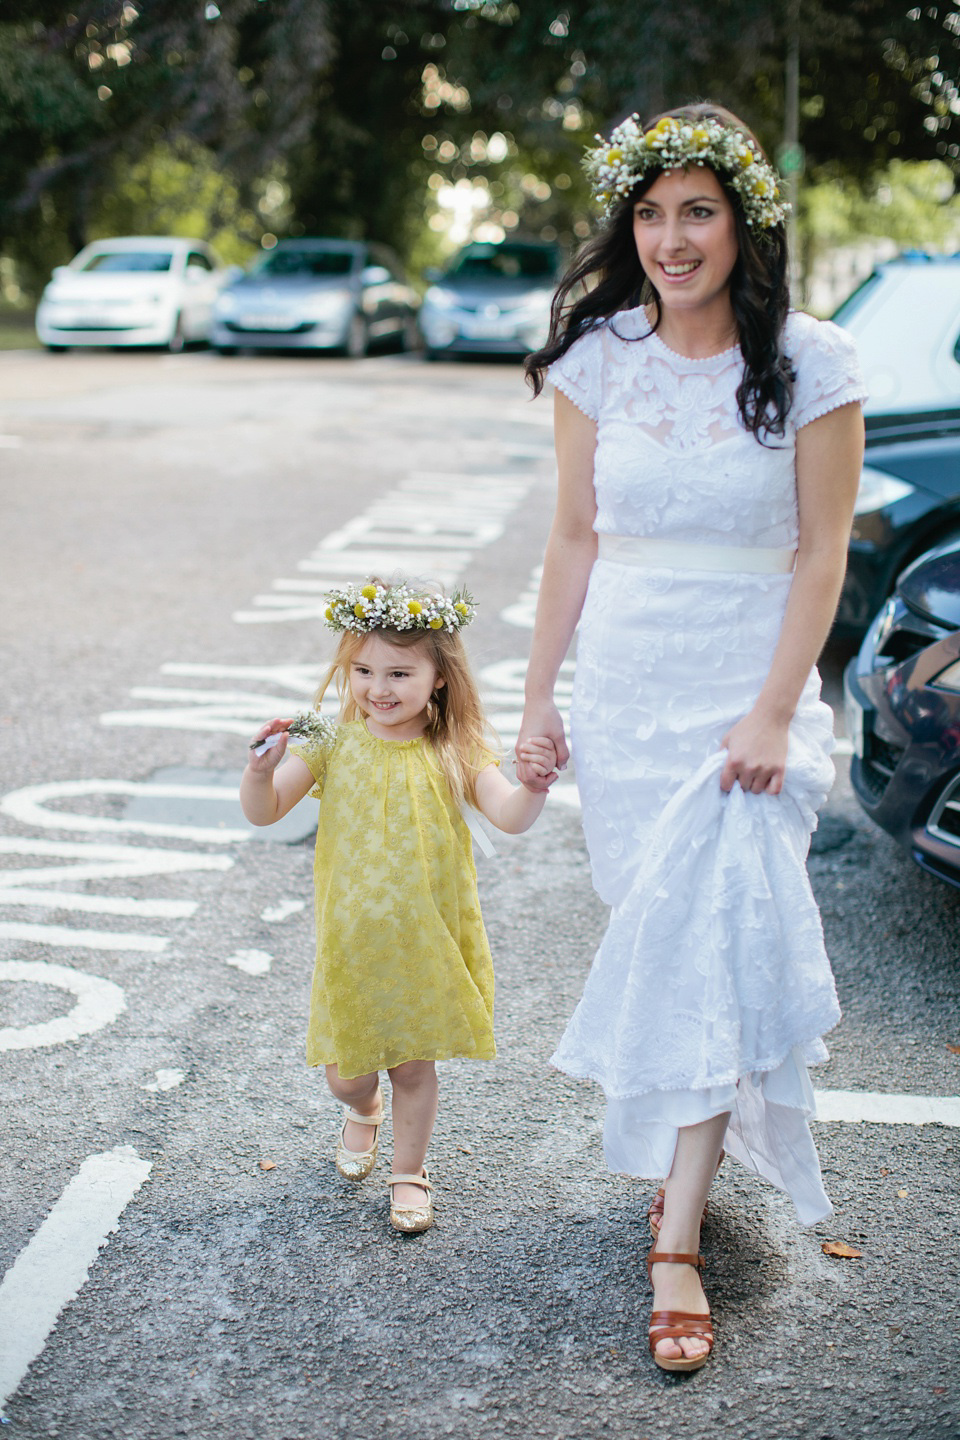 A Phase Eight Dress for a Good Life Festival Wedding in Wales. Images by Green Antlers Photography.